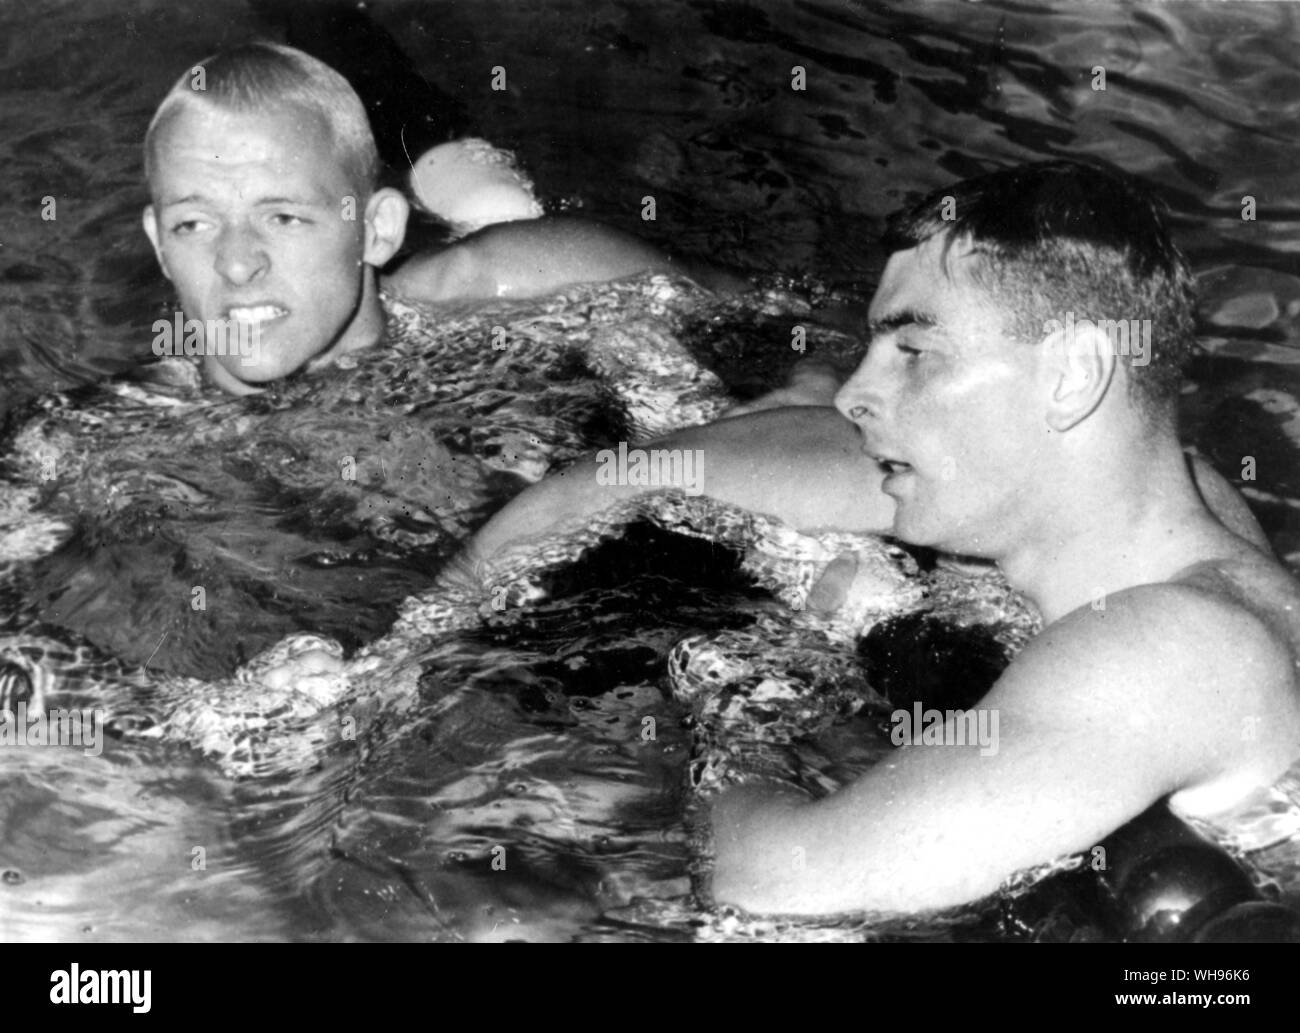 Italy, Rome, Olympic Games, 1960: John Devitt (Australia, right) and Lance Larson (USA) are shown in the olympic pool after there neck and neck 100m final race. The judges gave the title to Devitt, but both were acredited with the time of 55.2 seconds, an olympic record.. Stock Photo